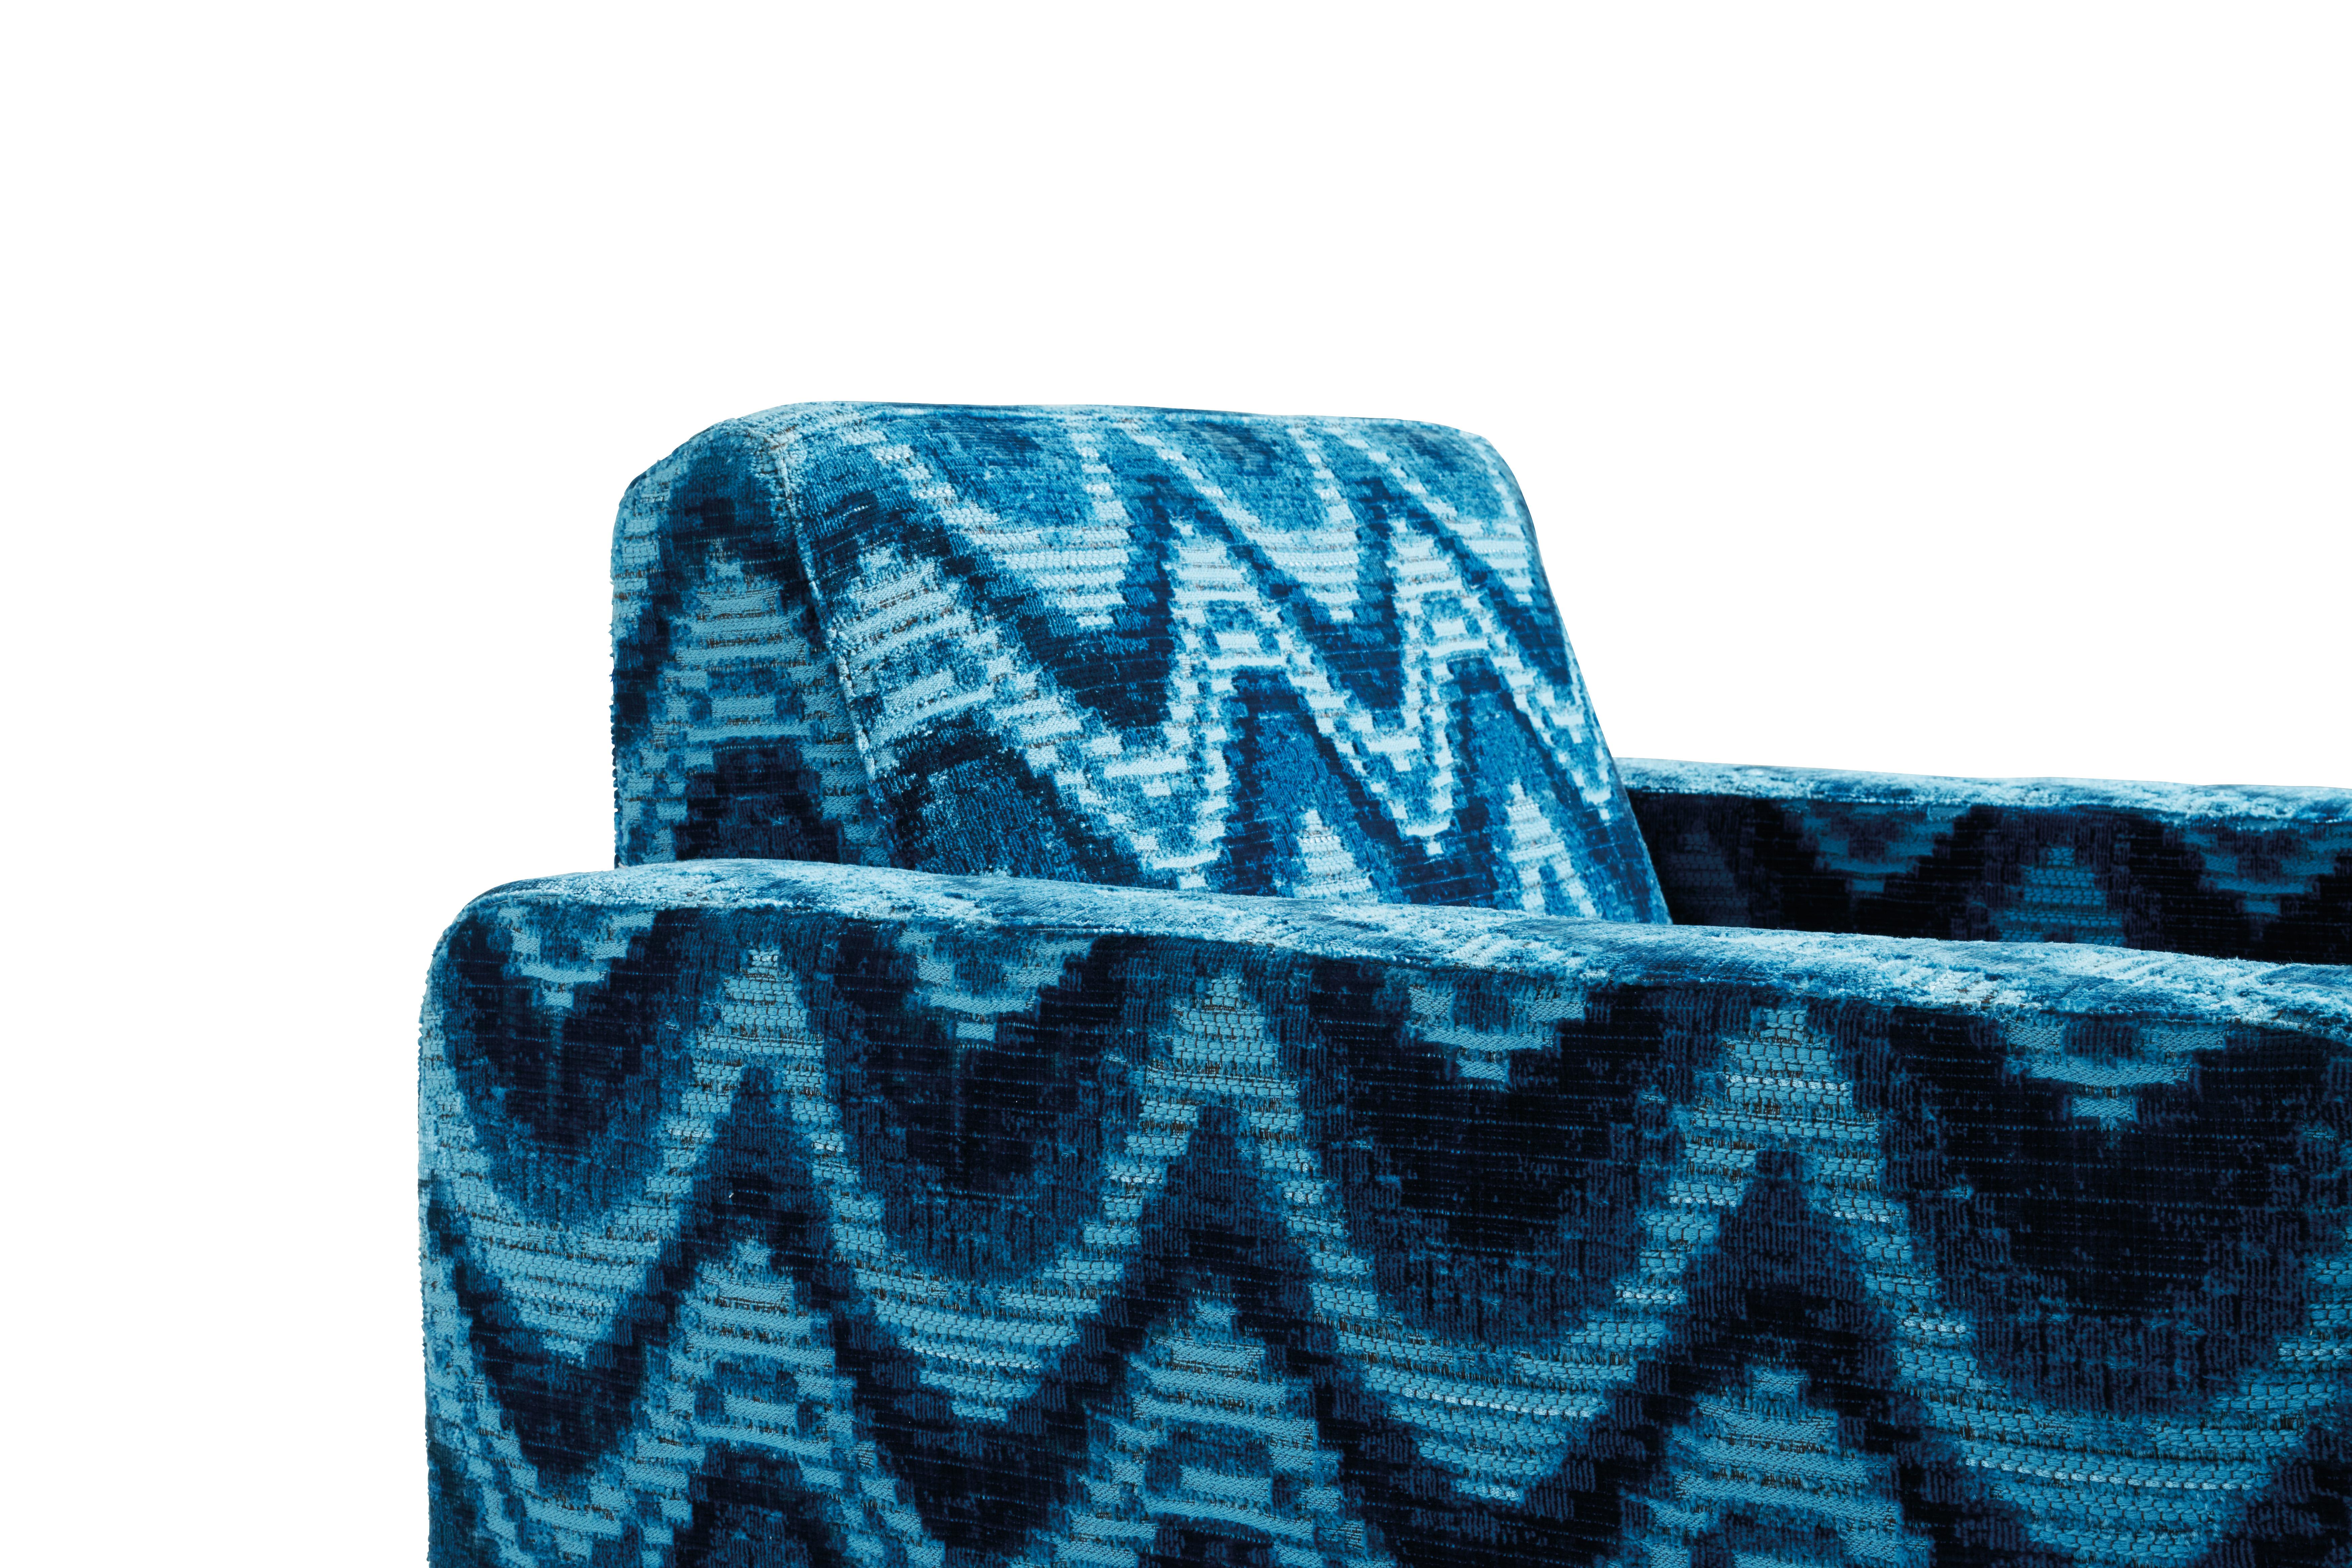 21st Century Type Armchair in Blue Jacquard Fabric by Etro Home Interiors For Sale 1